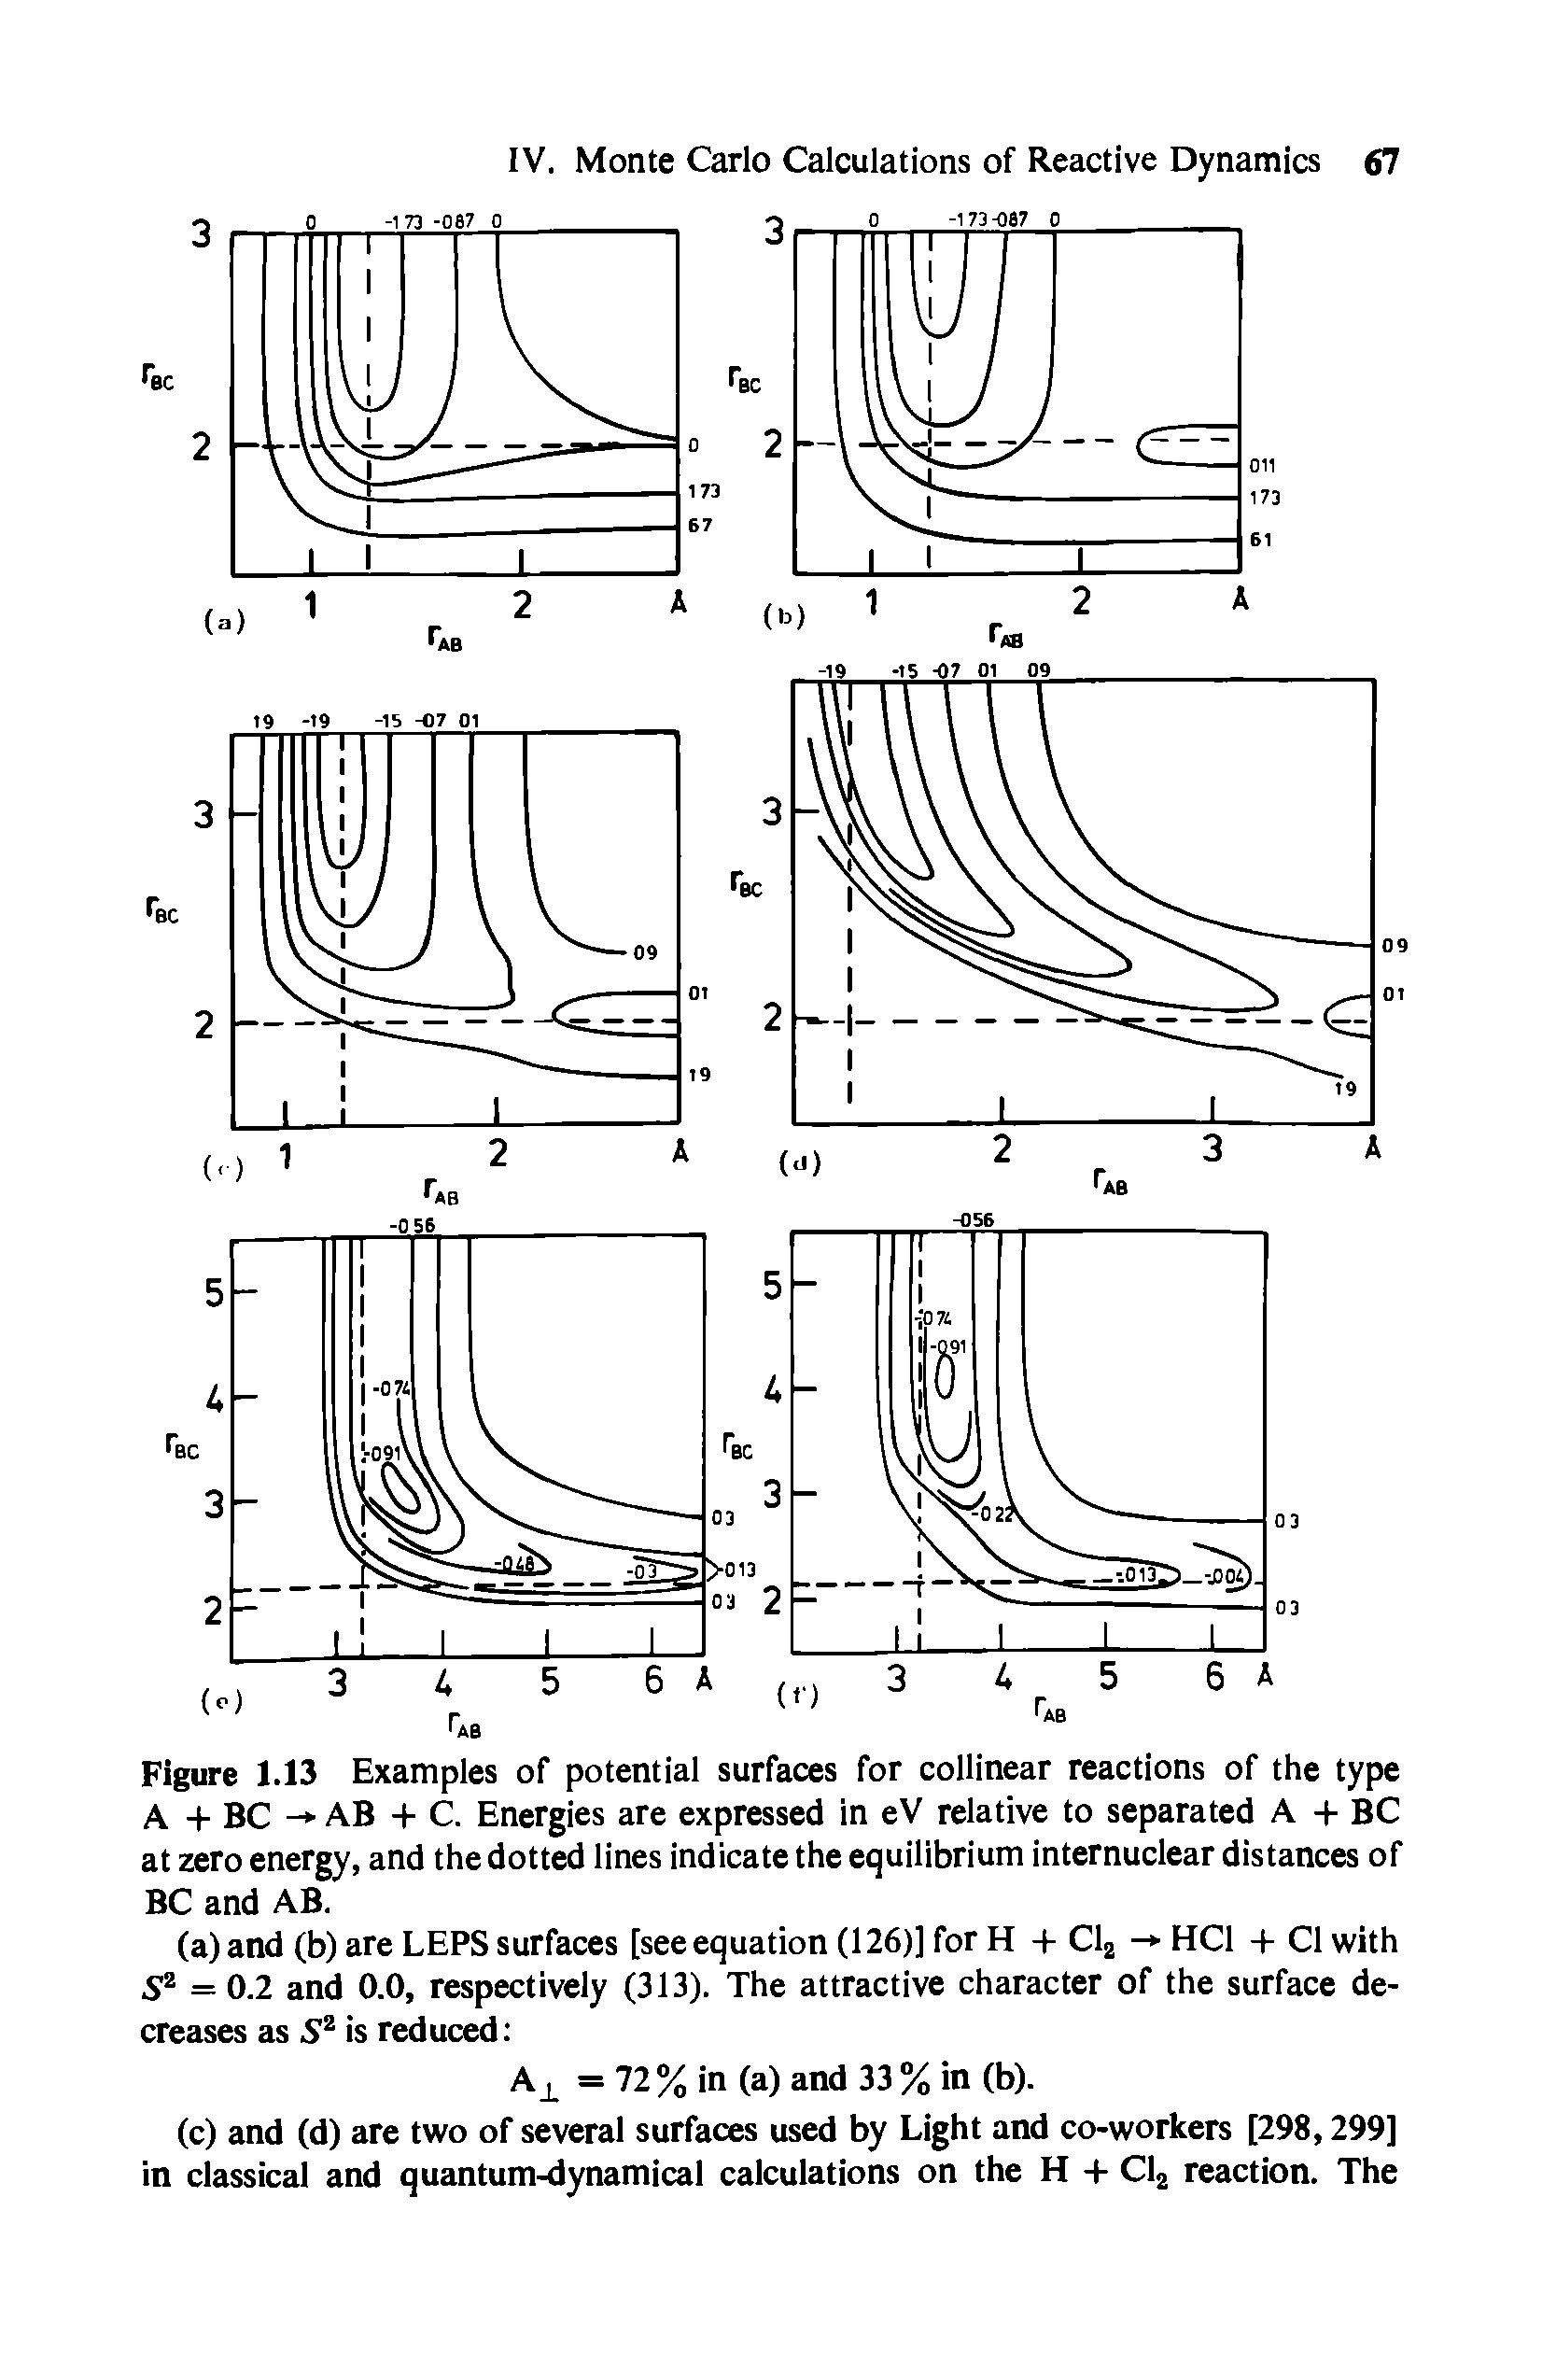 Figure 1.13 Examples of potential surfaces for collinear reactions of the type A + BC - AB + C. Energies are expressed in eV relative to separated A + BC at zero energy, and the dotted lines indicate the equilibrium internuclear distances of BC and AB.